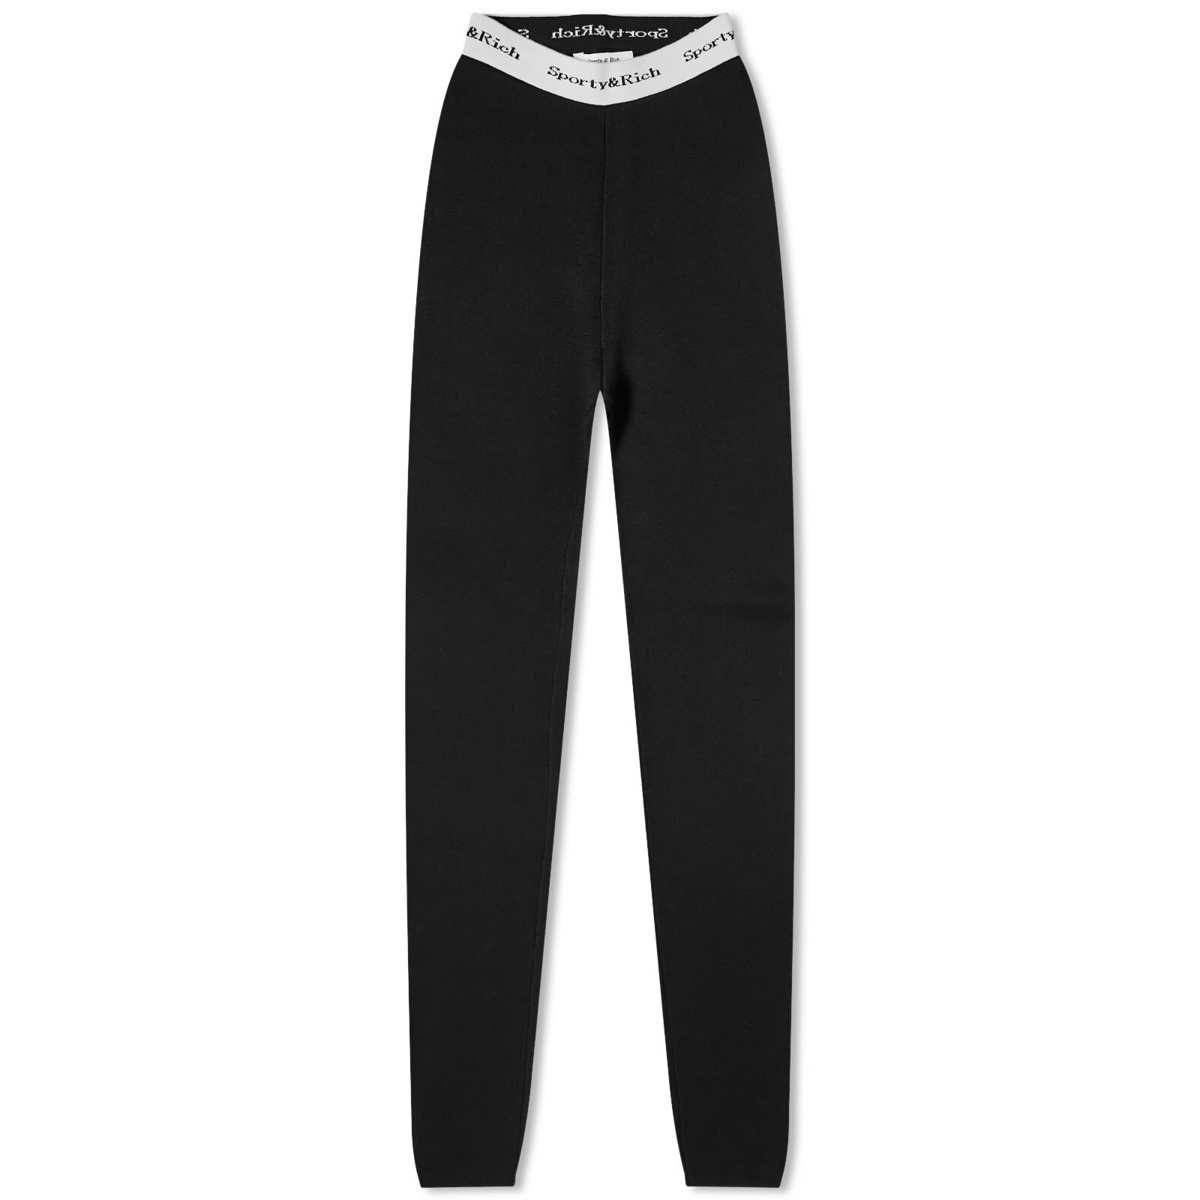 Buy SPORTY & RICH Gray High-waisted Leggings - Dark Grey/white At 68% Off